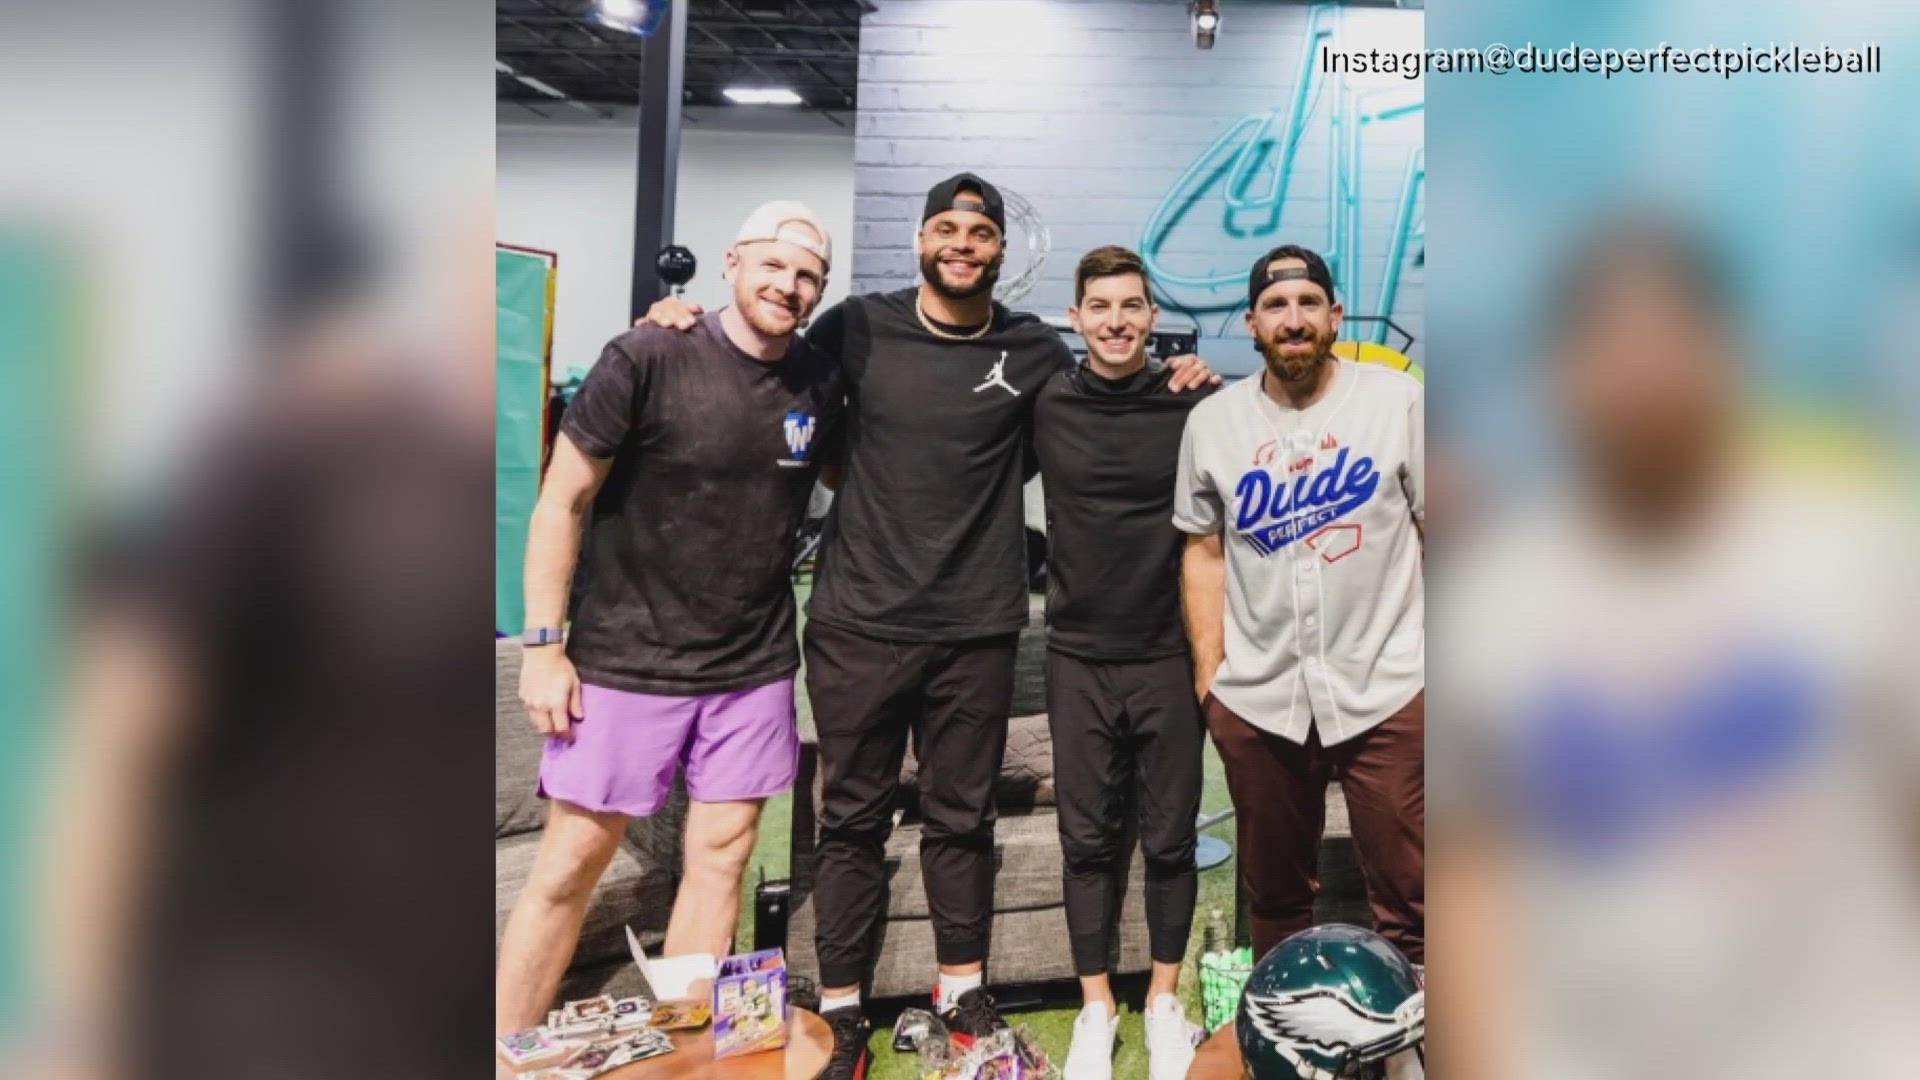 The team, called the Pandas, will be based in Frisco, where both Dude Perfect and the Dallas Cowboys' headquarters are based.